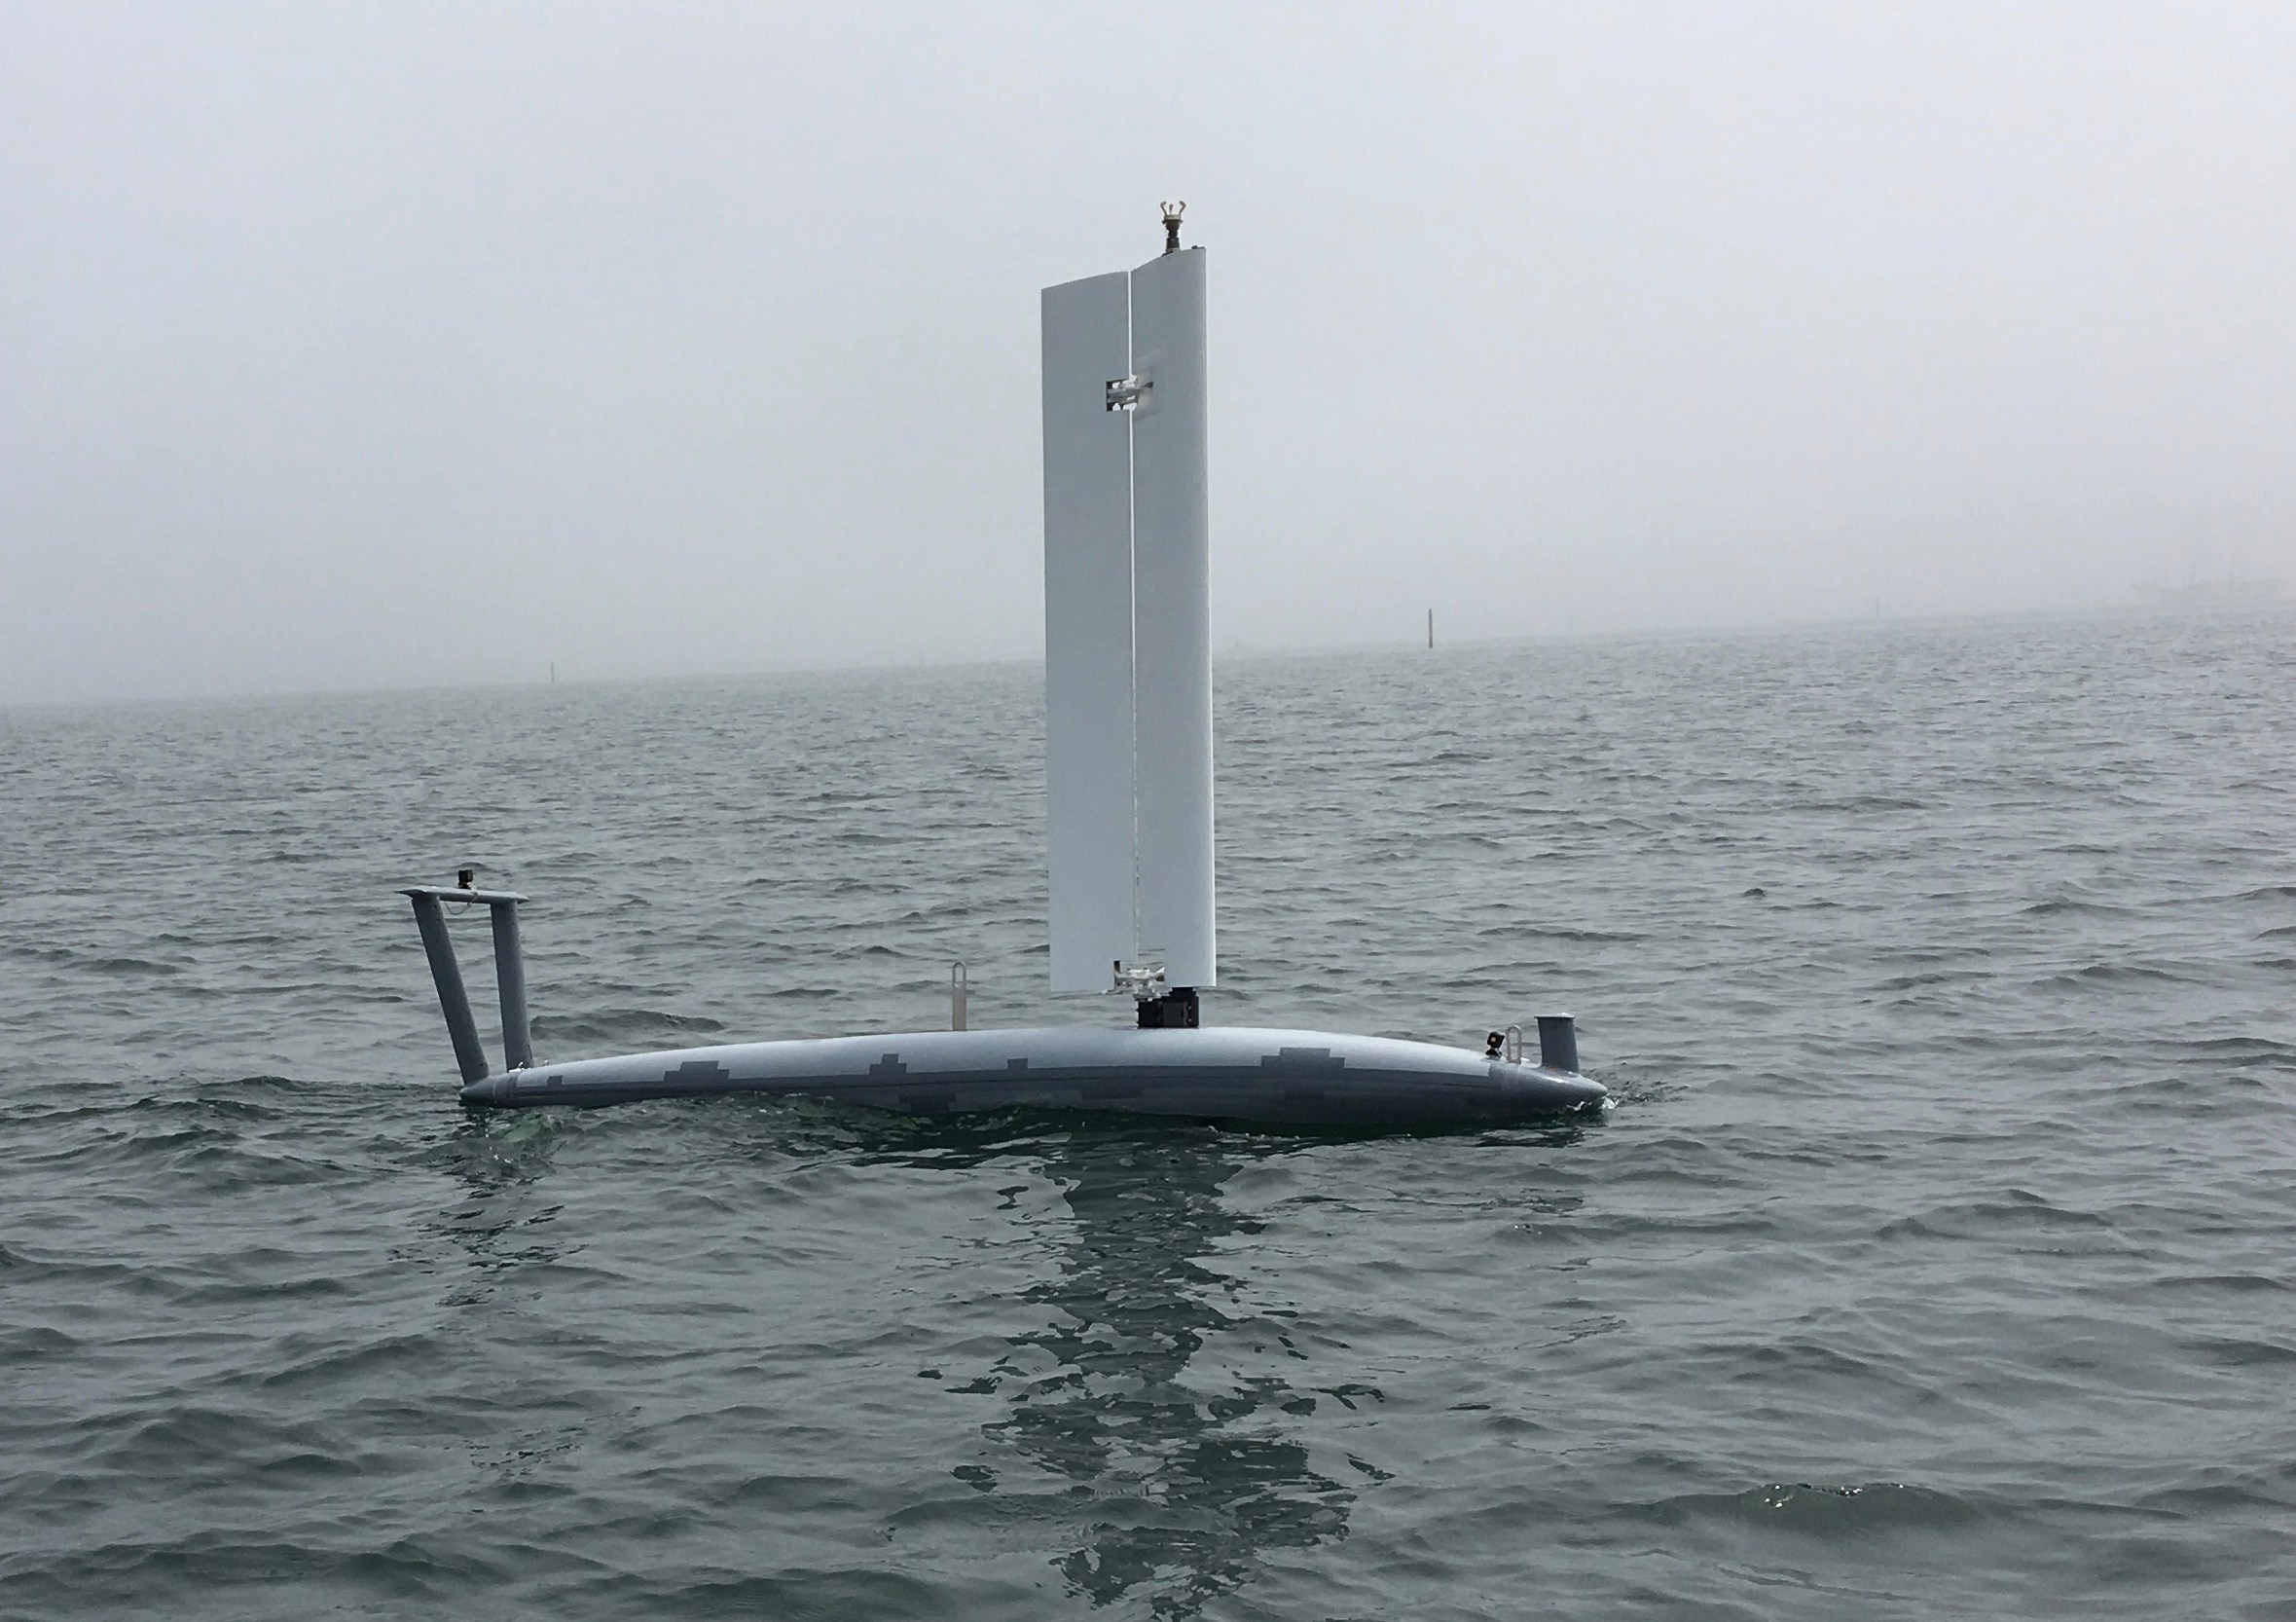 Lockheed Martin Ventures Invests In Ocean Aero Strengthening Focus On Unmanned Maritime Systems